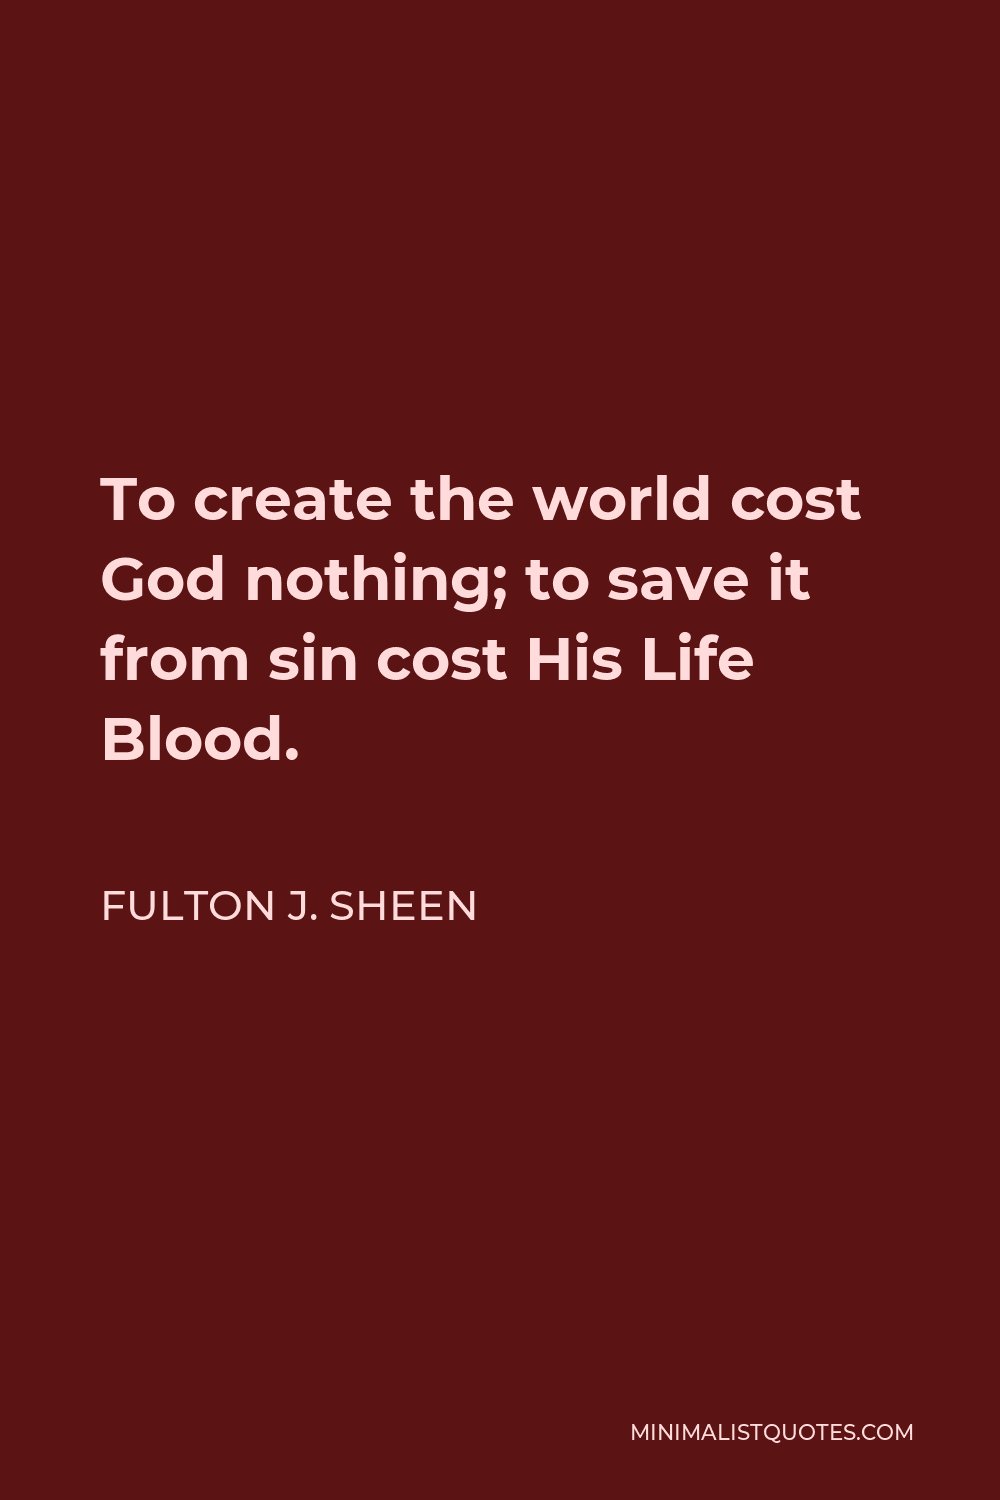 Fulton J. Sheen Quote - To create the world cost God nothing; to save it from sin cost His Life Blood.